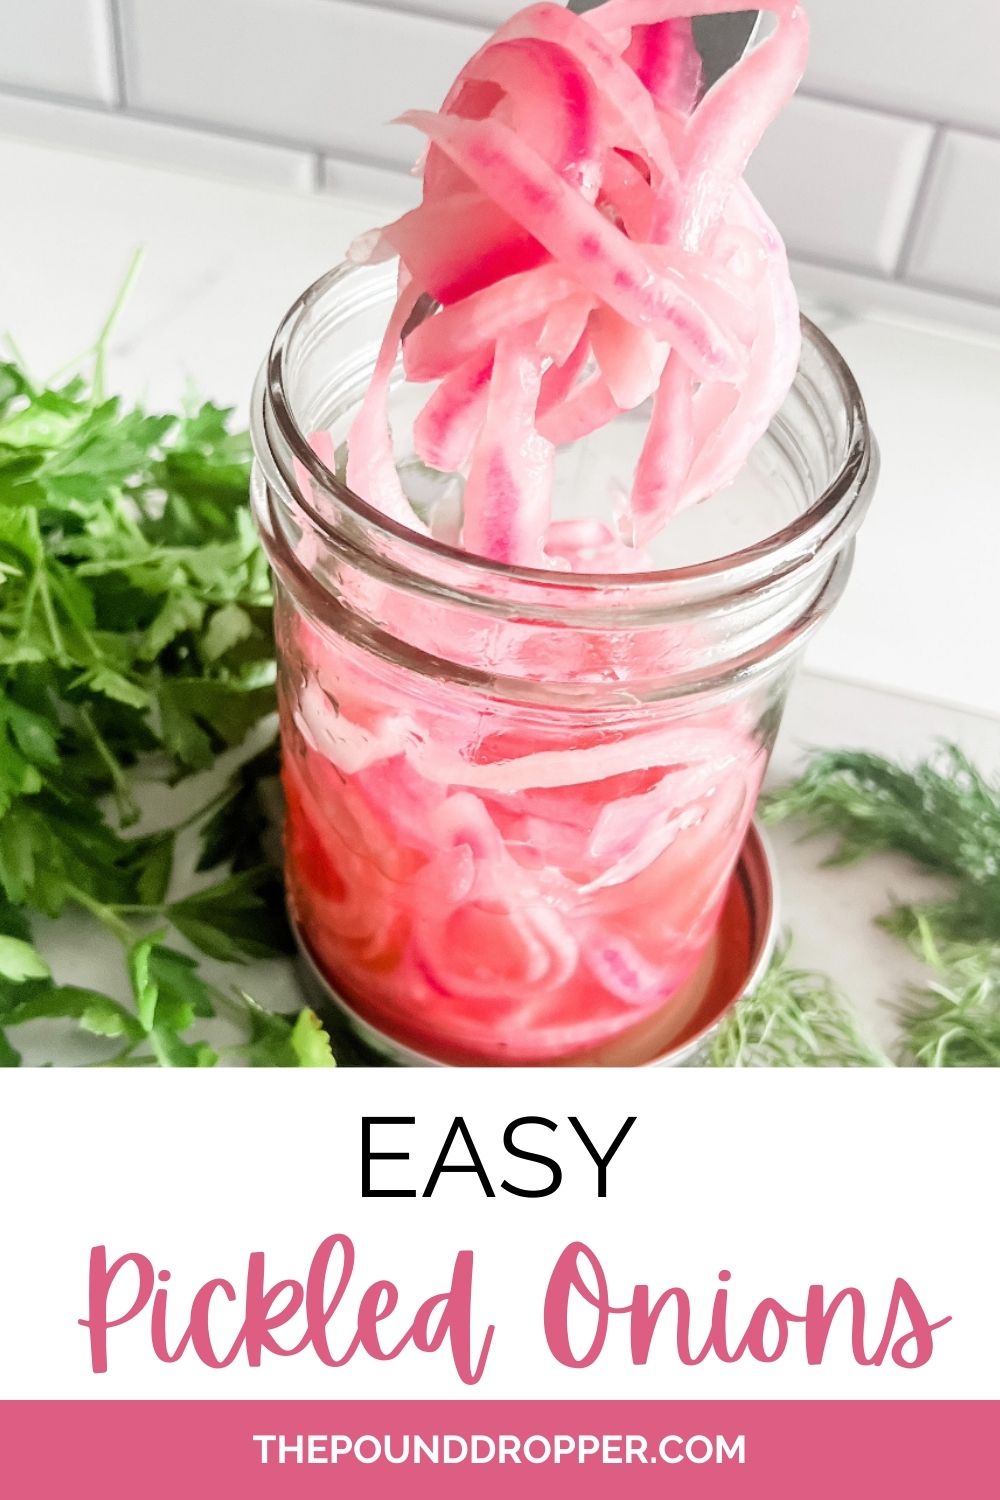 Easy Pickled Onions via @pounddropper